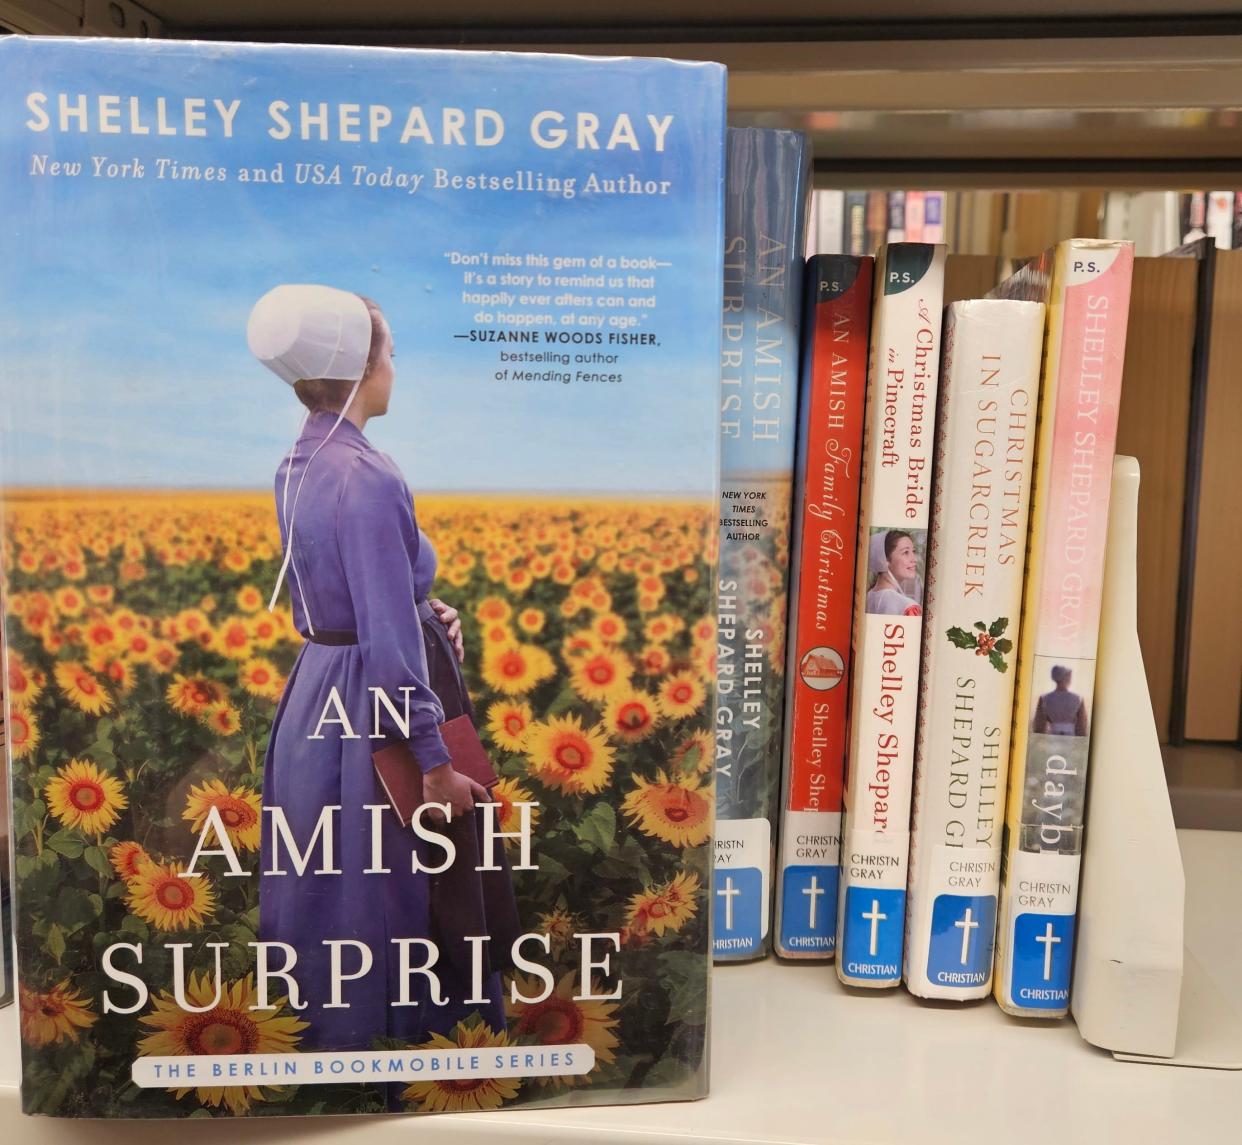 Many of Shelley Shepard Gray's books can be found at the local library.